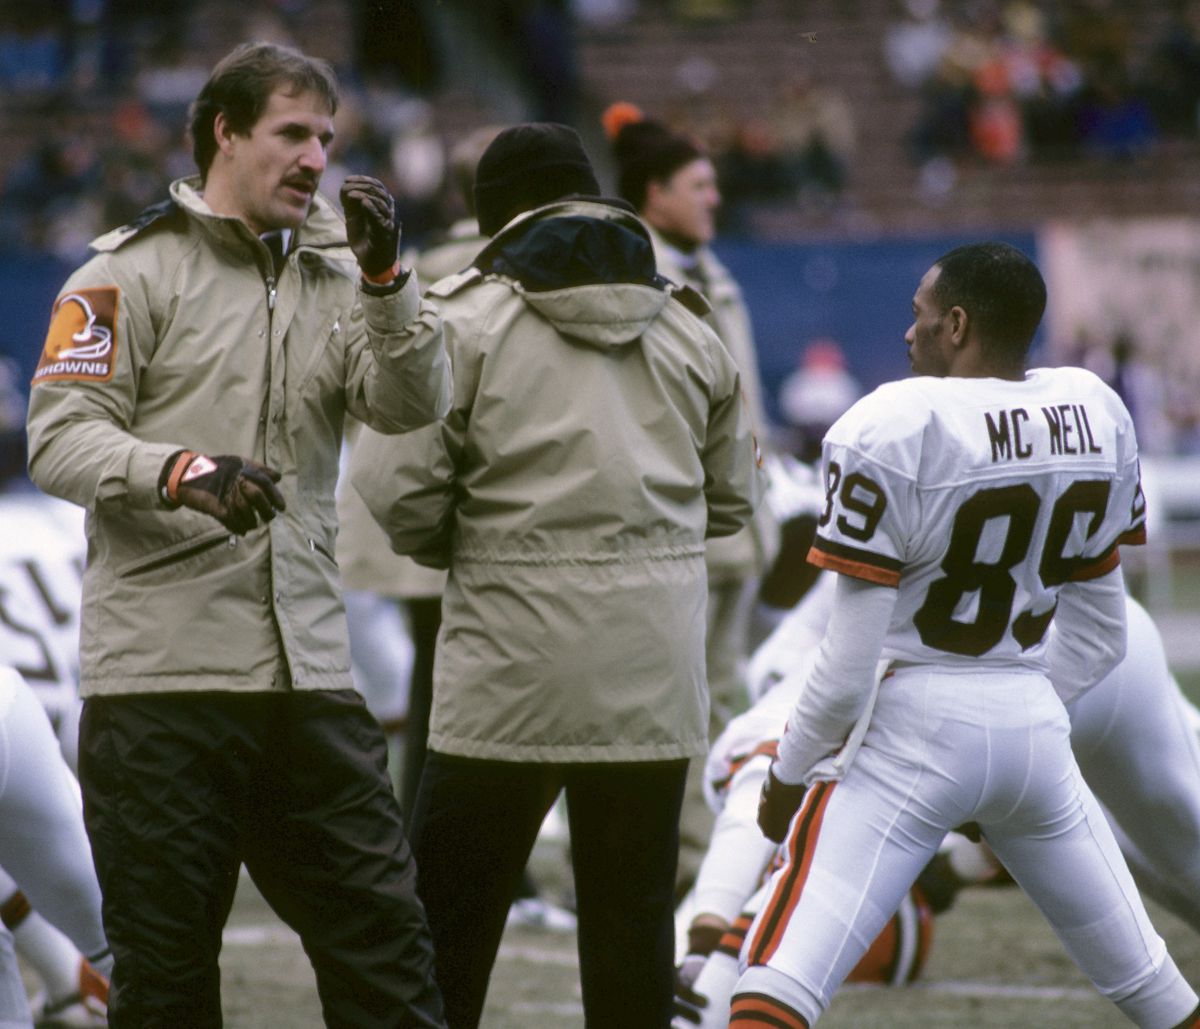 San Diego Chargers vs Cleveland Browns - December 21, 1986